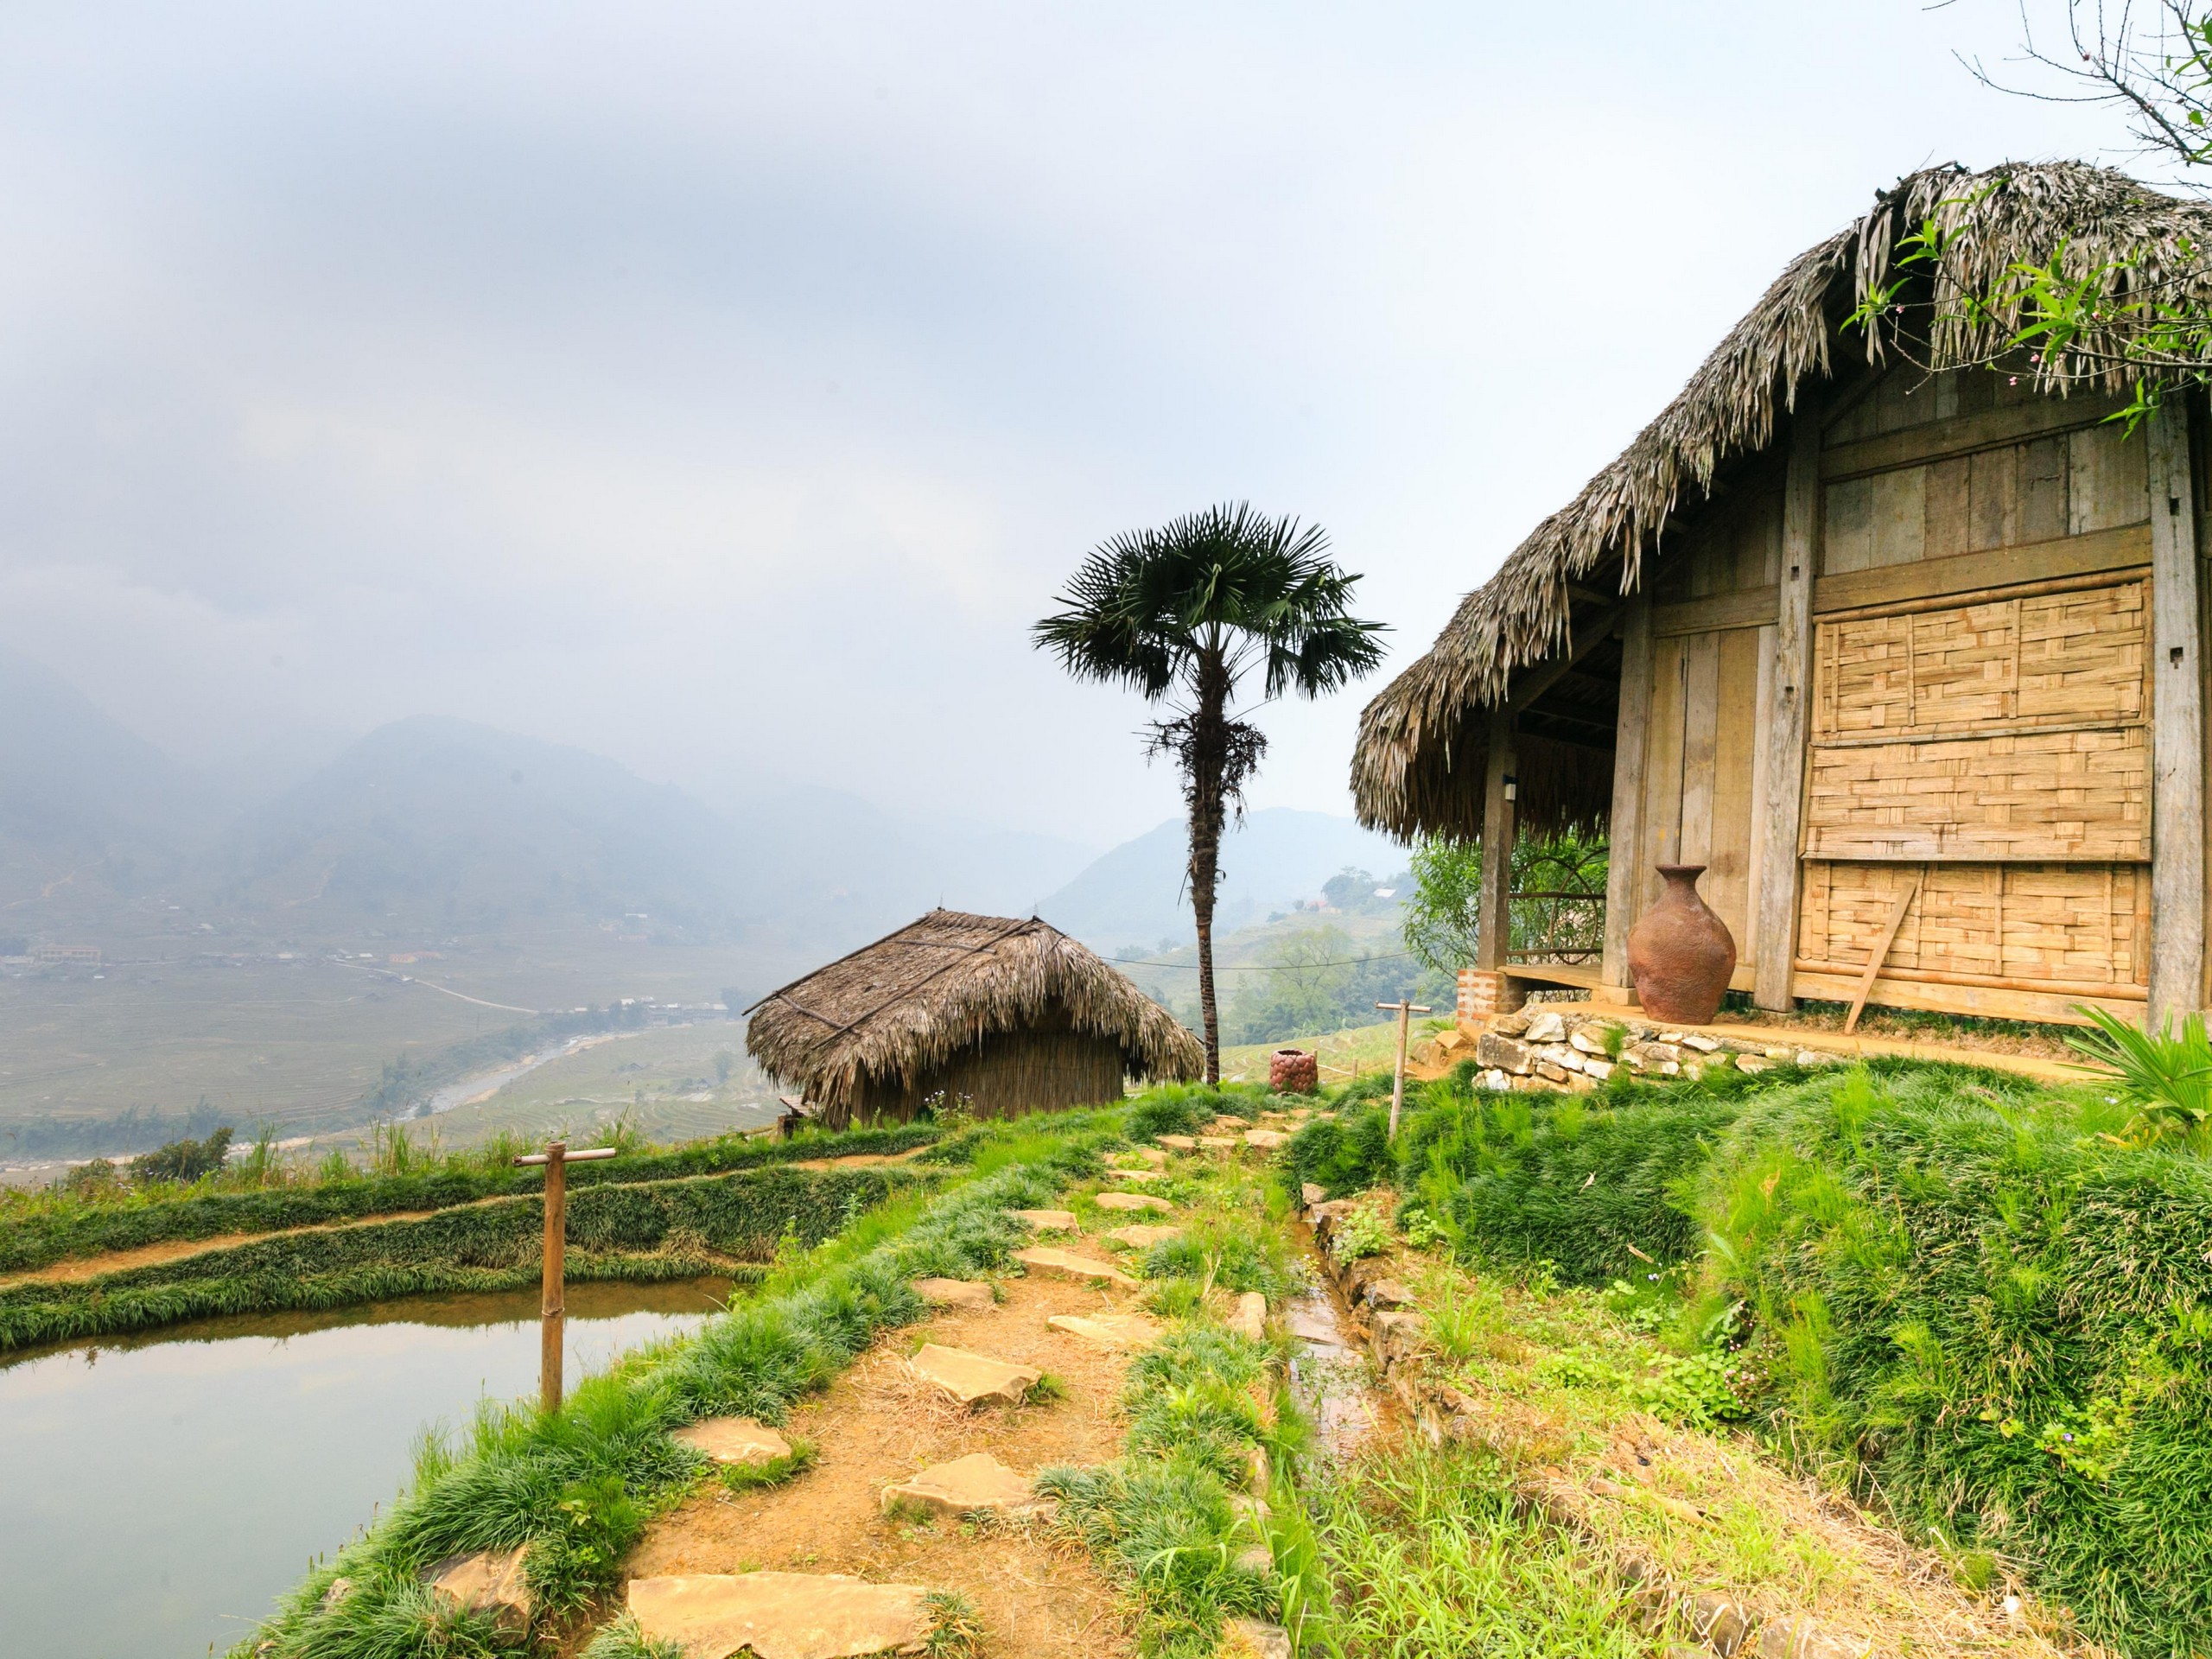 Vietnam's countryside in the Northern mountains